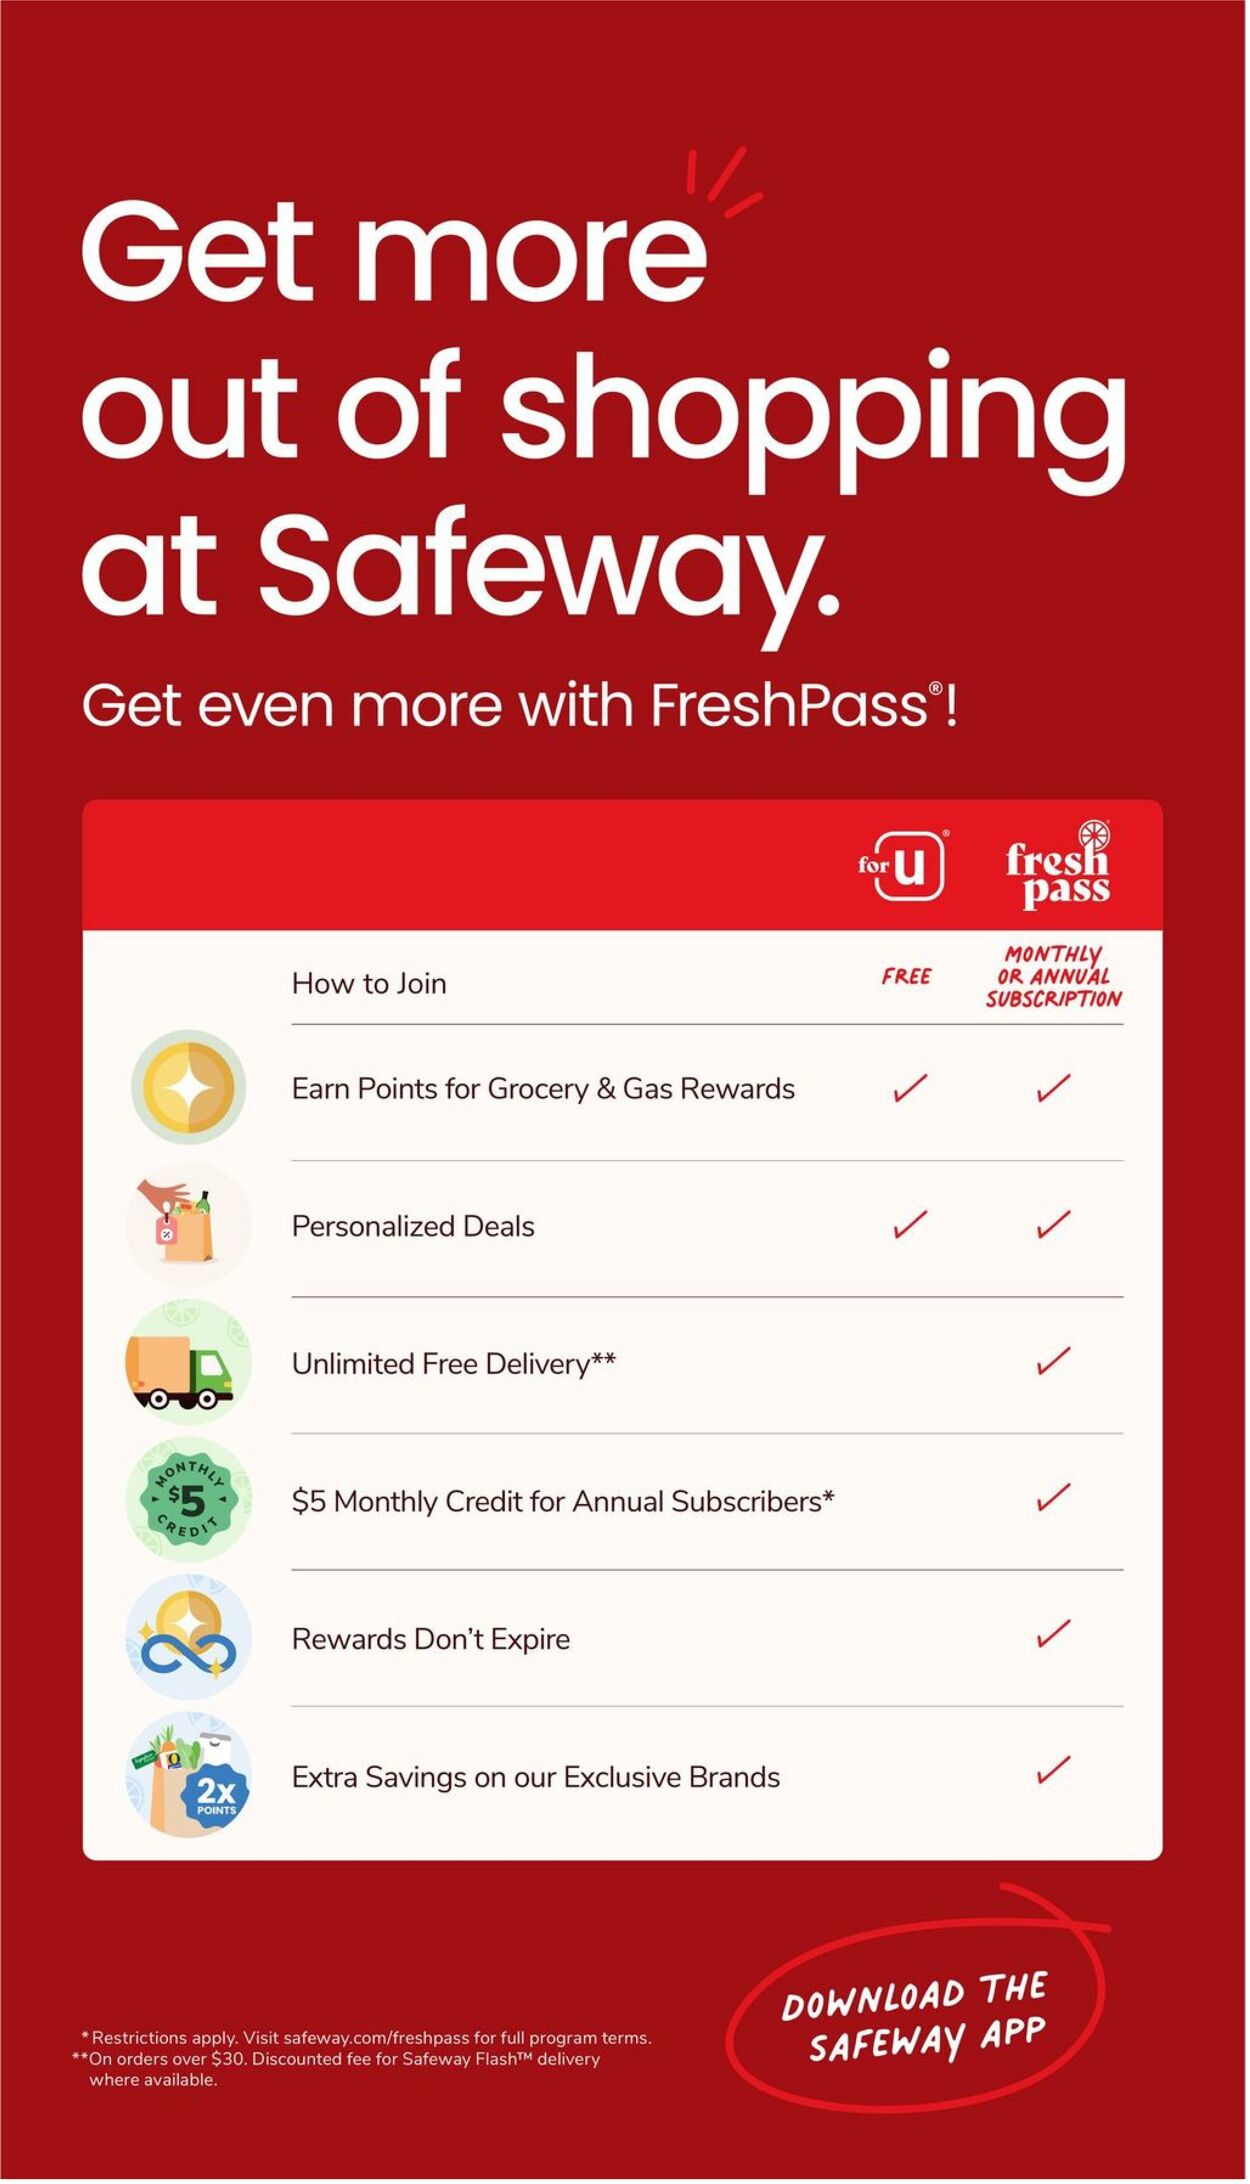 Safeway Ad from 06/21/2023